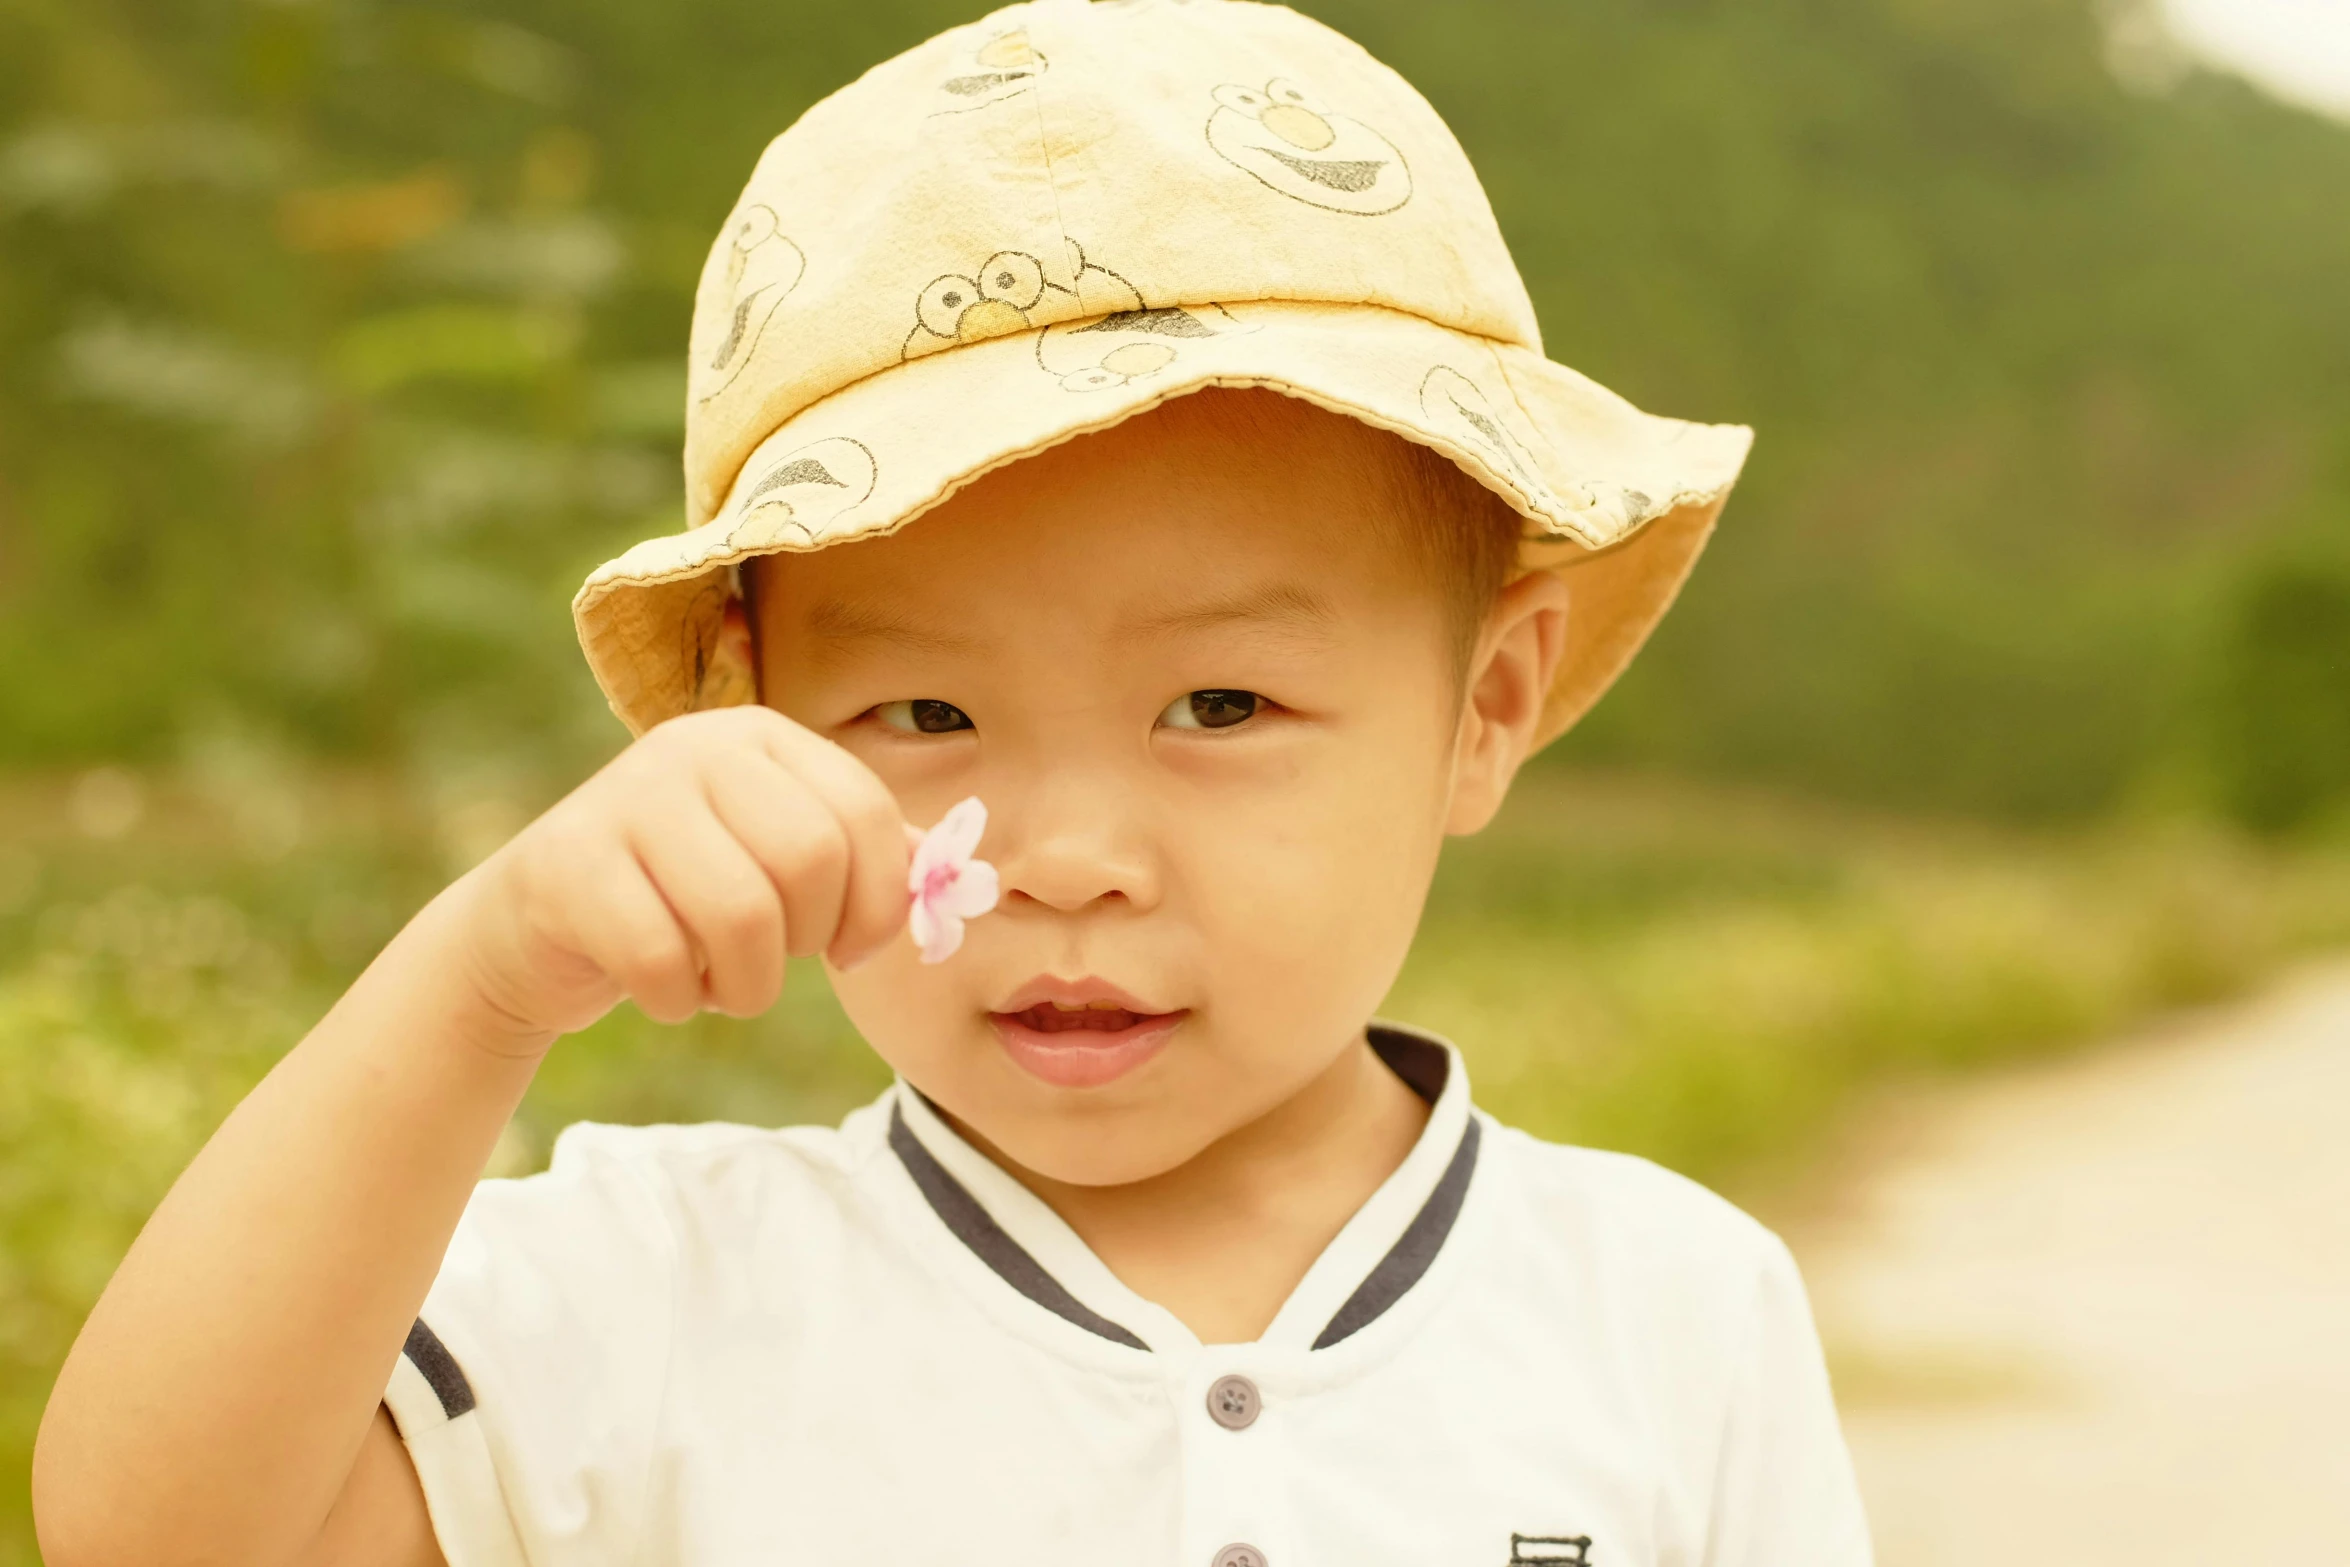 a small  wearing a baseball cap and holding a toothbrush